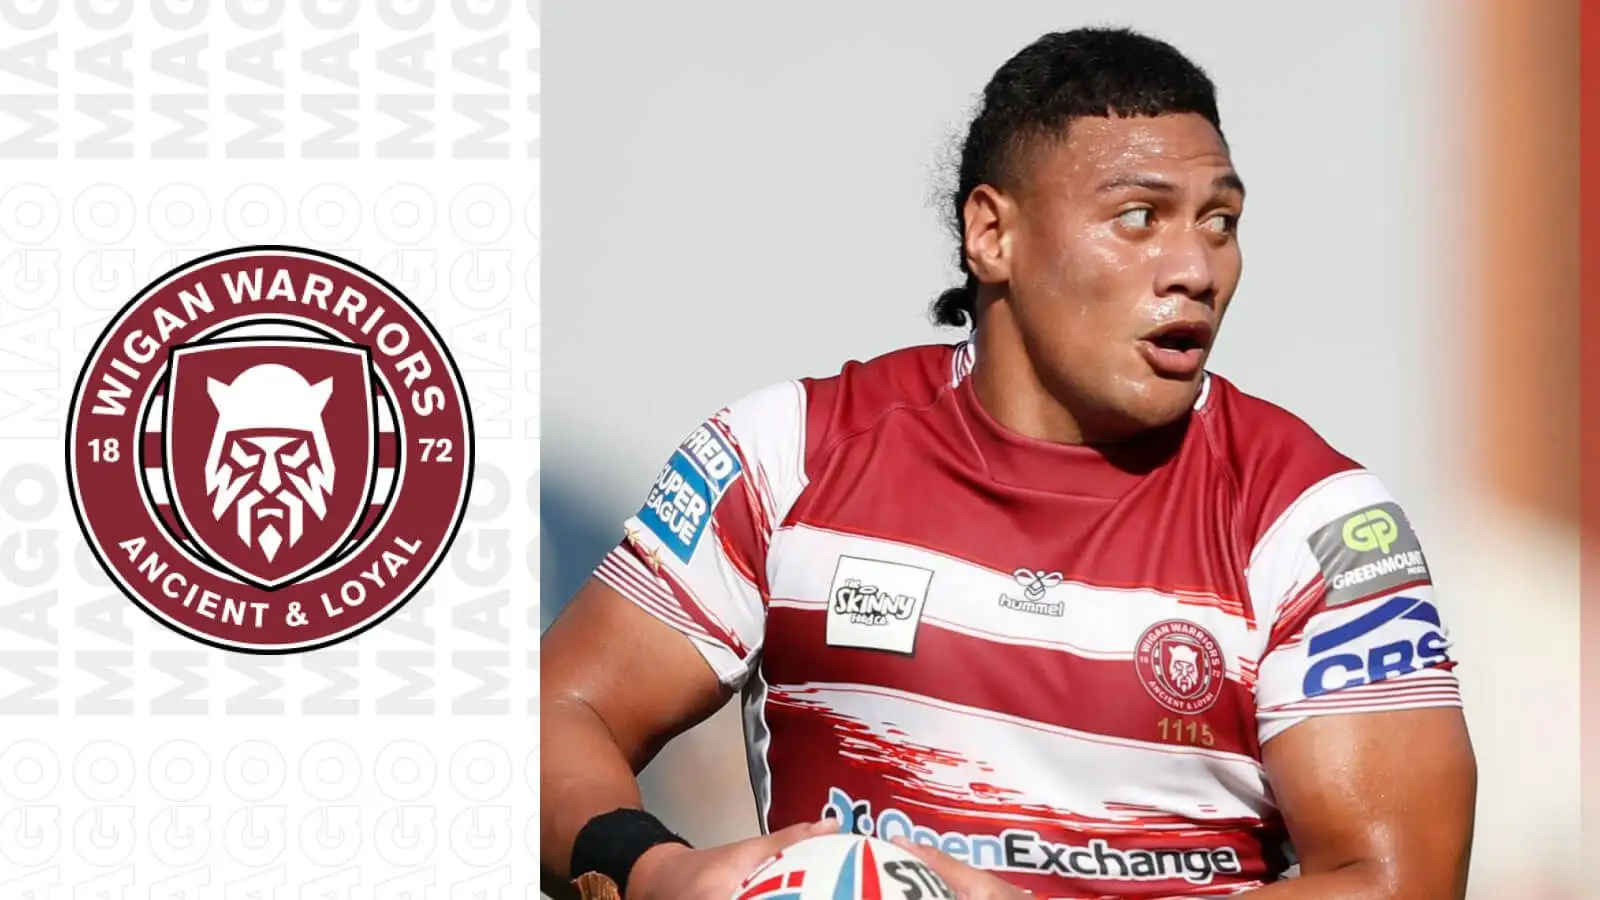 Wigan Warriors tie down overseas powerhouse to new contract: ‘He is determined to build on his recent form’